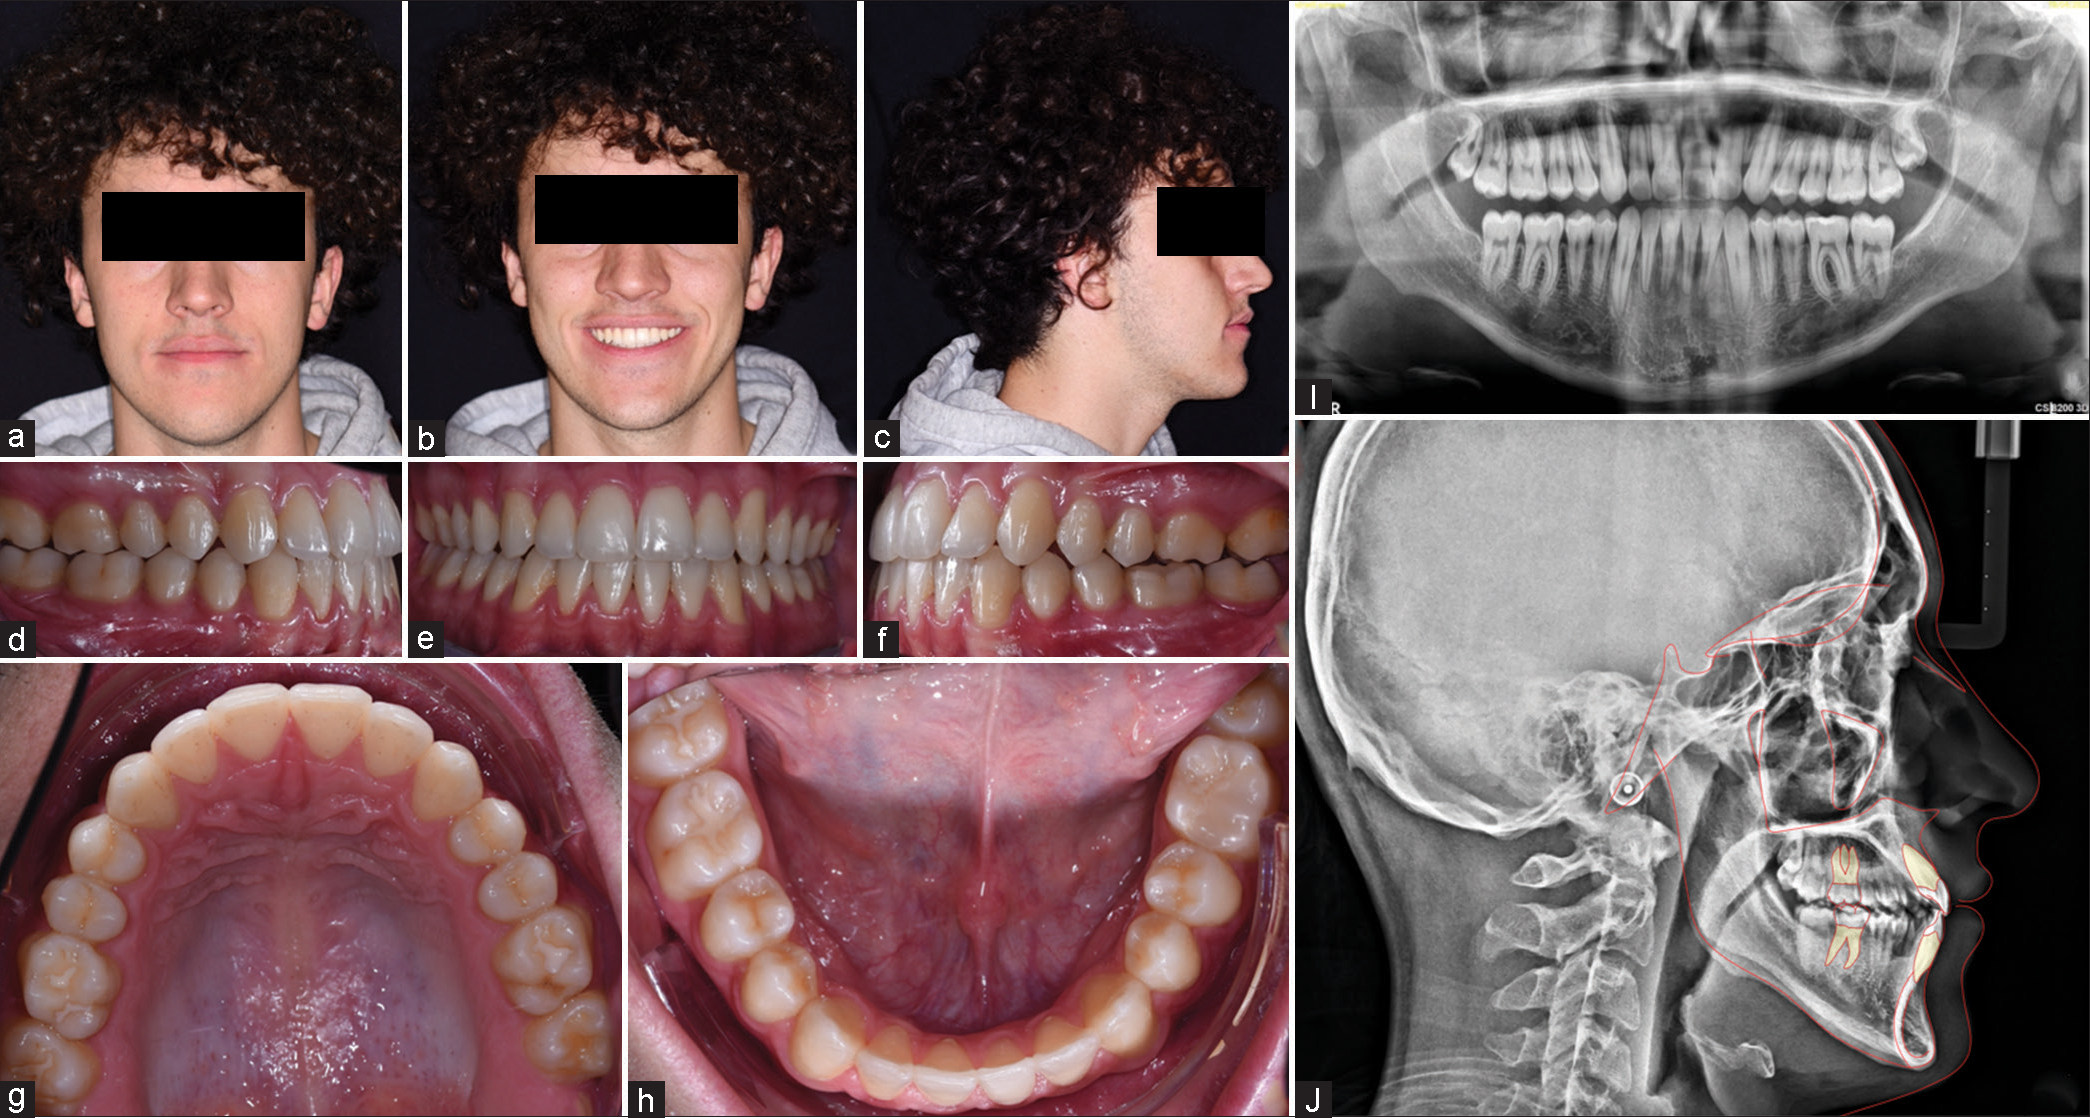 Final extraoral (a-c), intraoral photos (d-h), panoramic X-ray (i), lateral cephalogram (j).